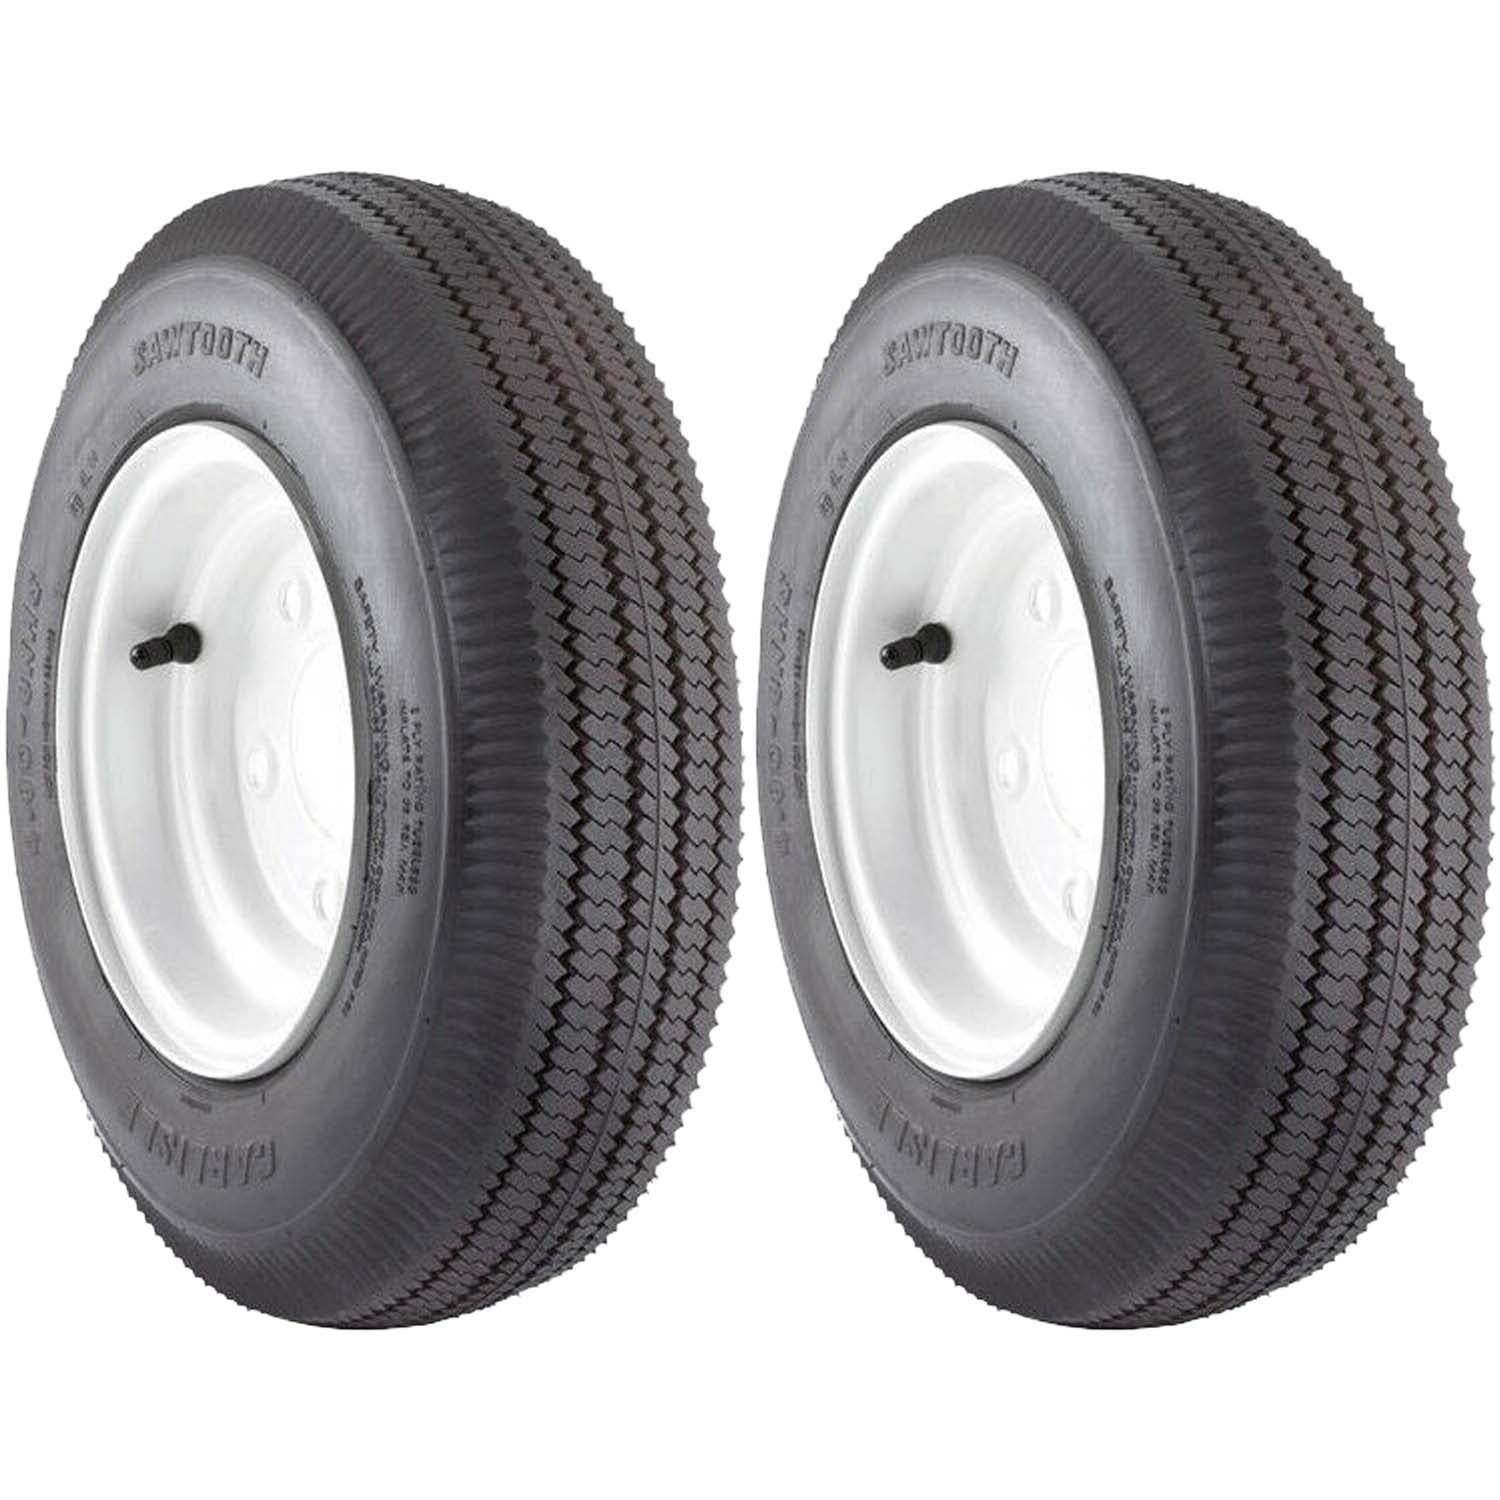 Carlisle Sawtooth Utility Tire 6ply 5.30-6 - Pack of 2